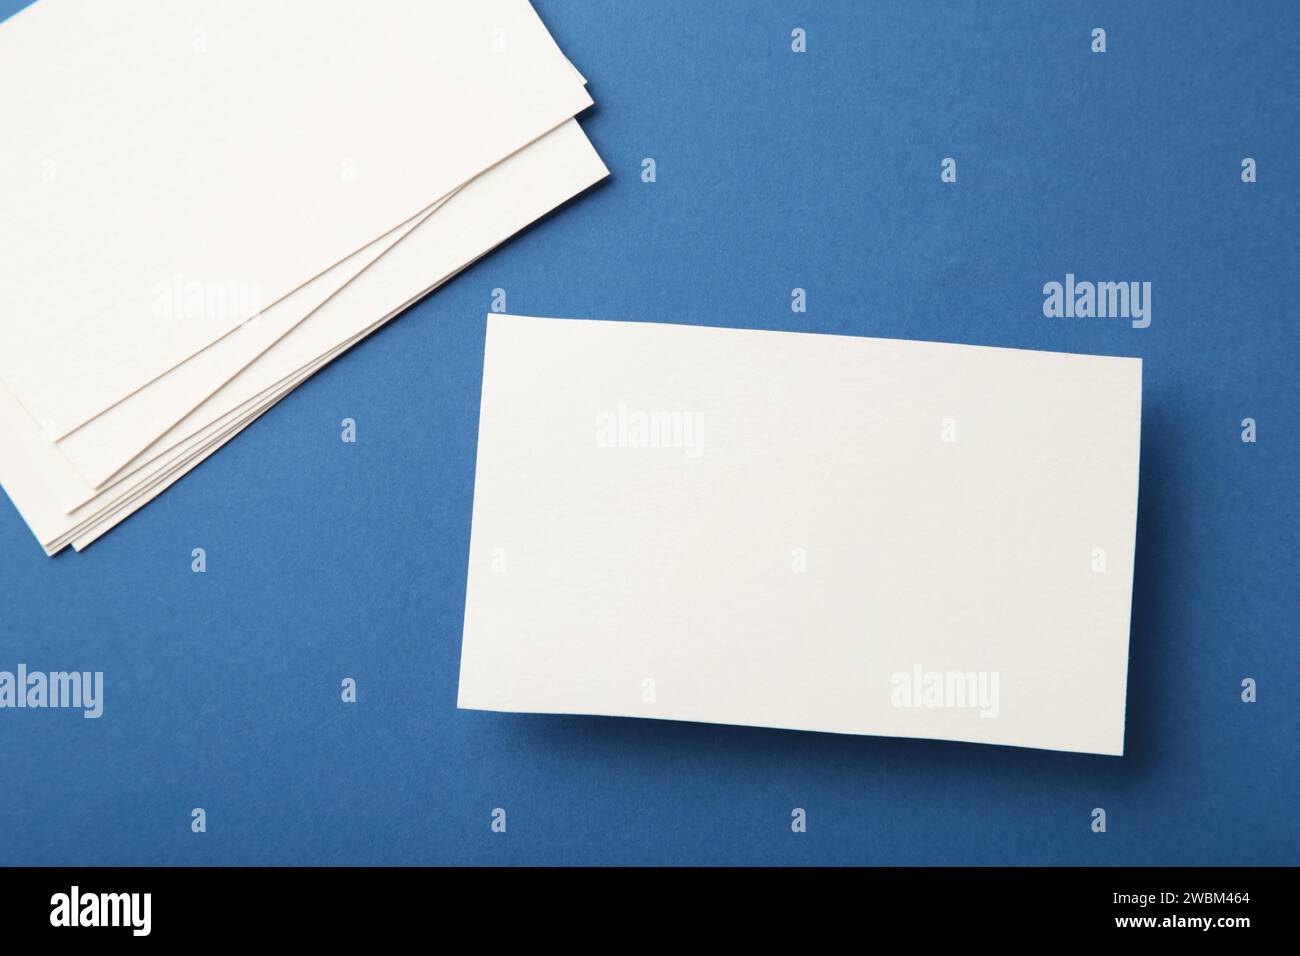 Blank white business cards on blue paper background. Mockup for branding identity. Template for graphic designers portfolios. Stock Photo